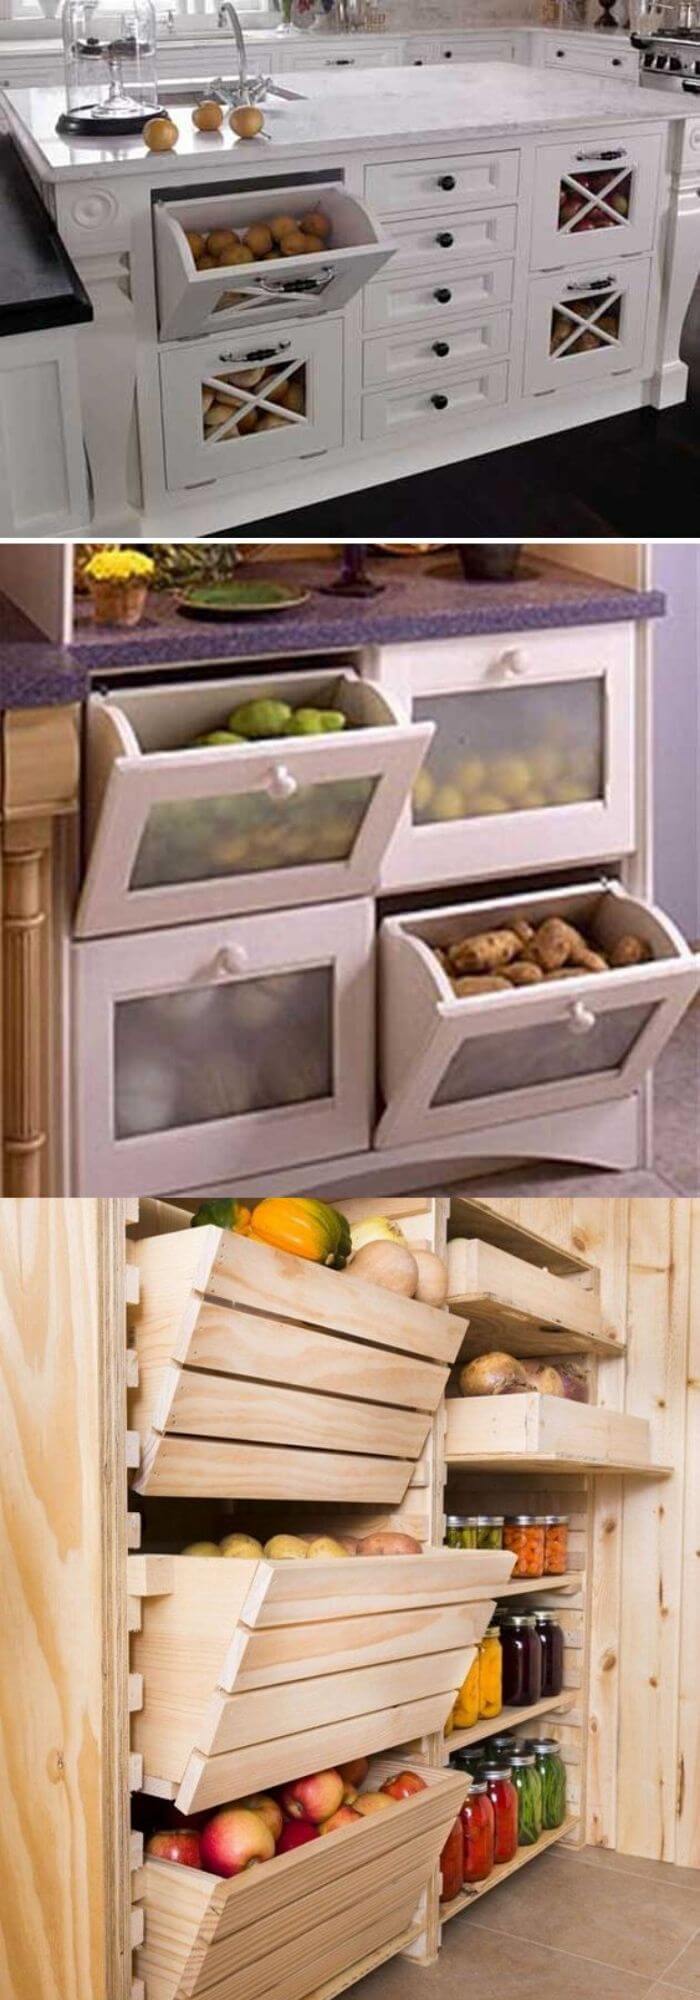 18+ Clever Small Kitchen Storage Ideas & Hacks Easy In 18